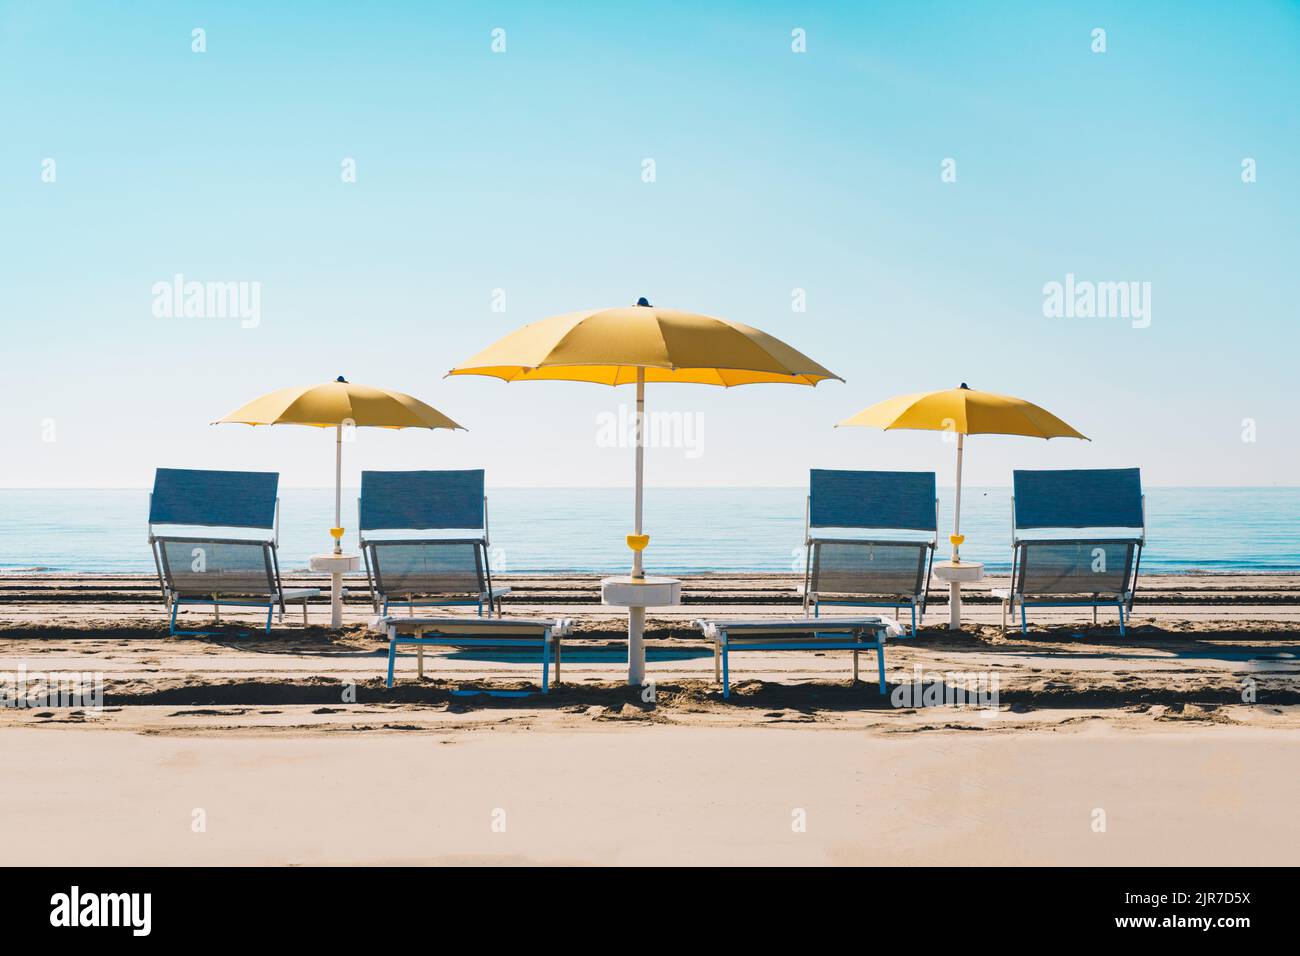 Idyllic beach with umbrella and sunbed at the Adriatic sea. Typical scene at the seaside in Italy, Europe during summer. Stock Photo